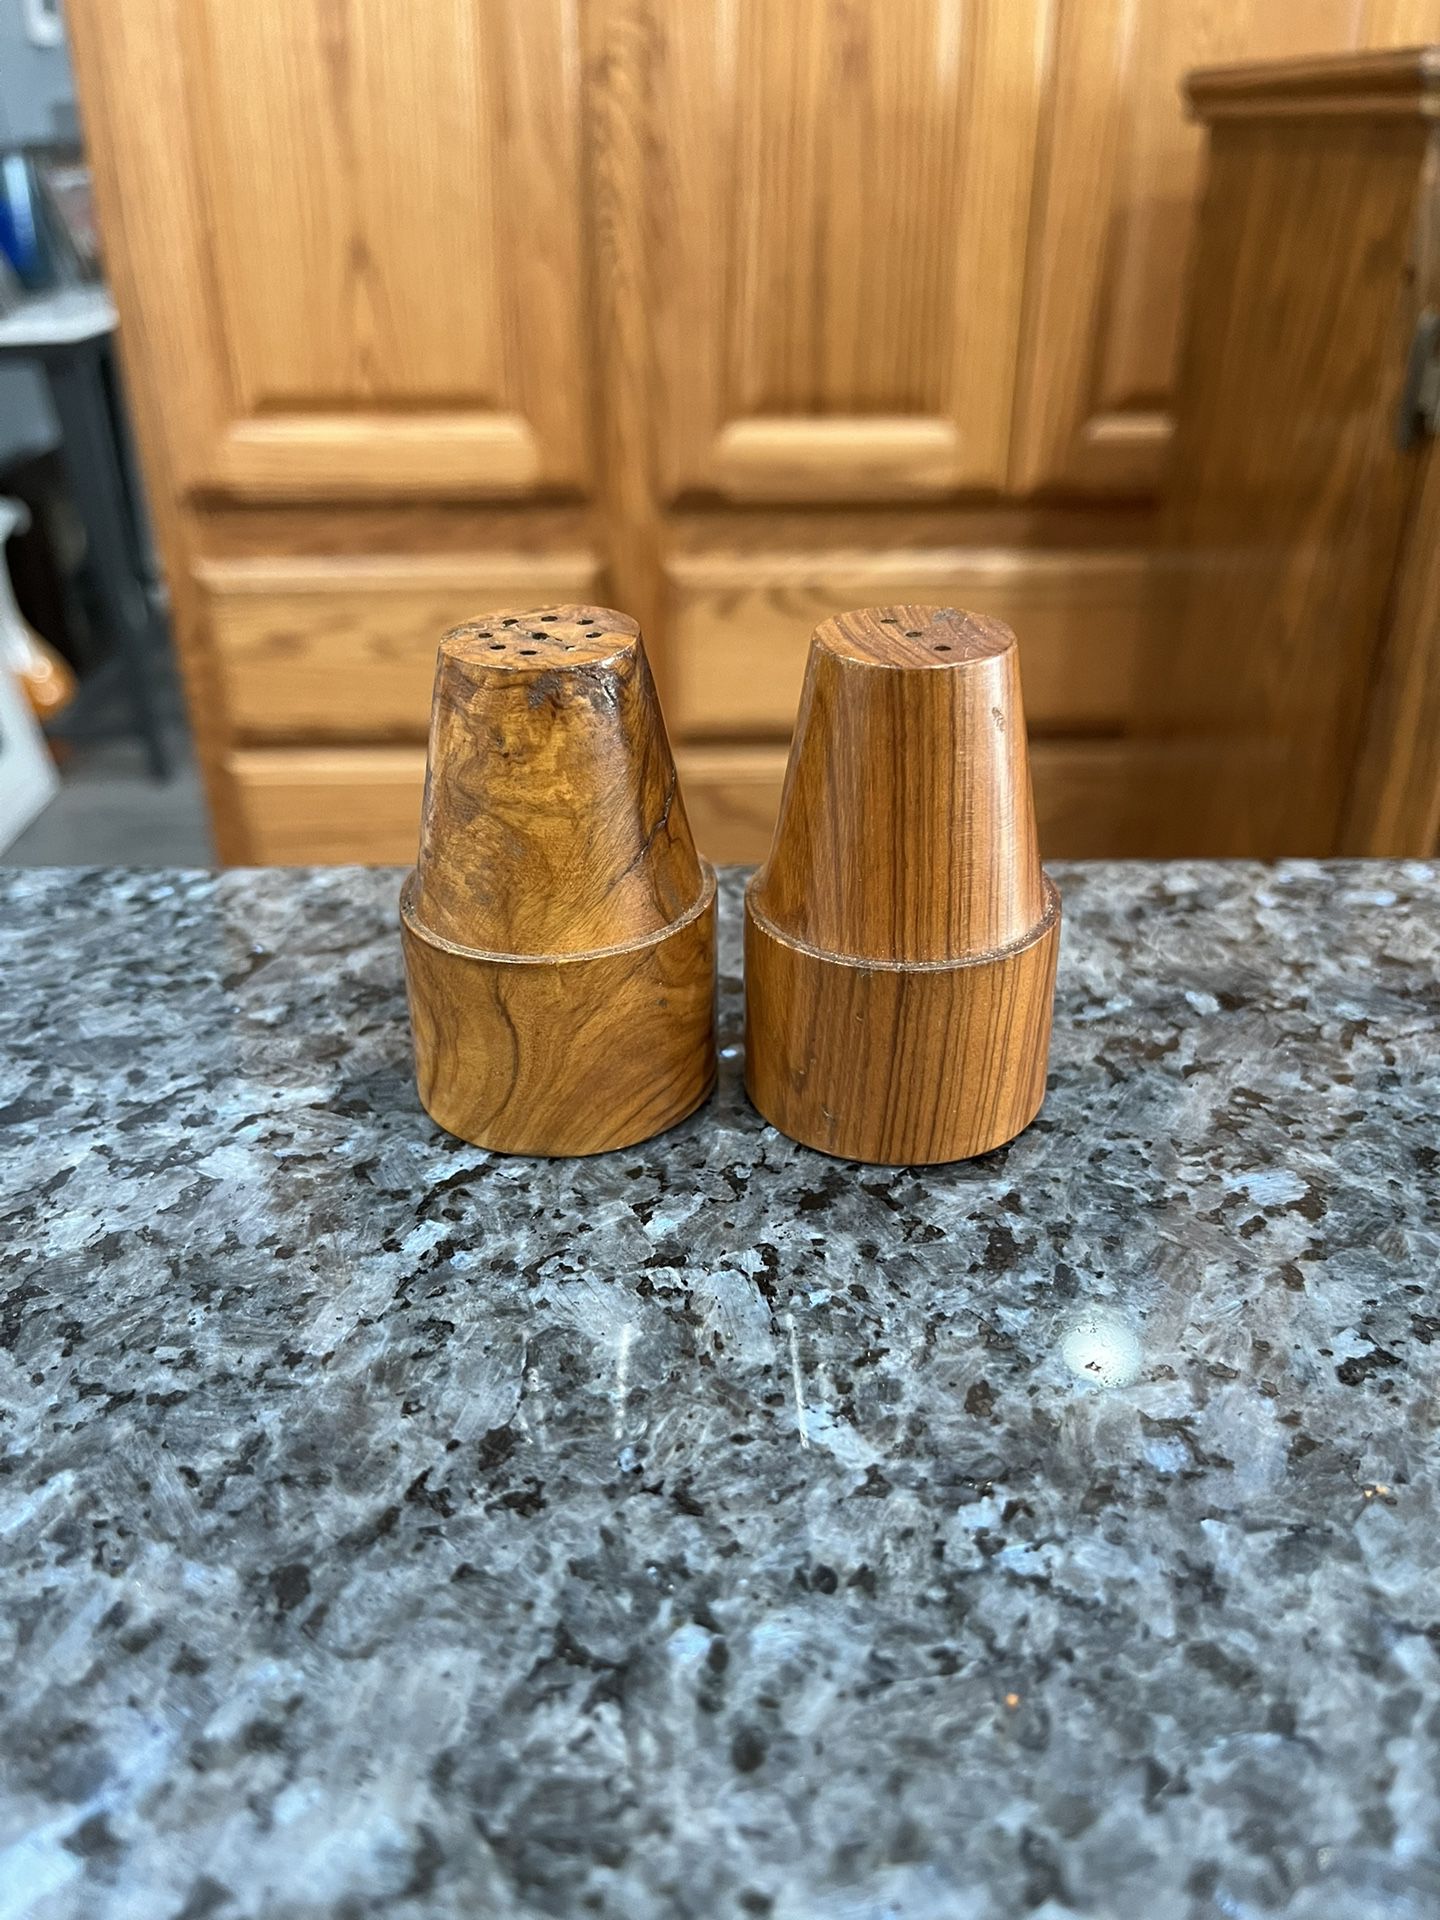 Vintage Wood Salt And Pepper Shakers.  Size 2 1/4 Inches Tall.  Preowned Display Only